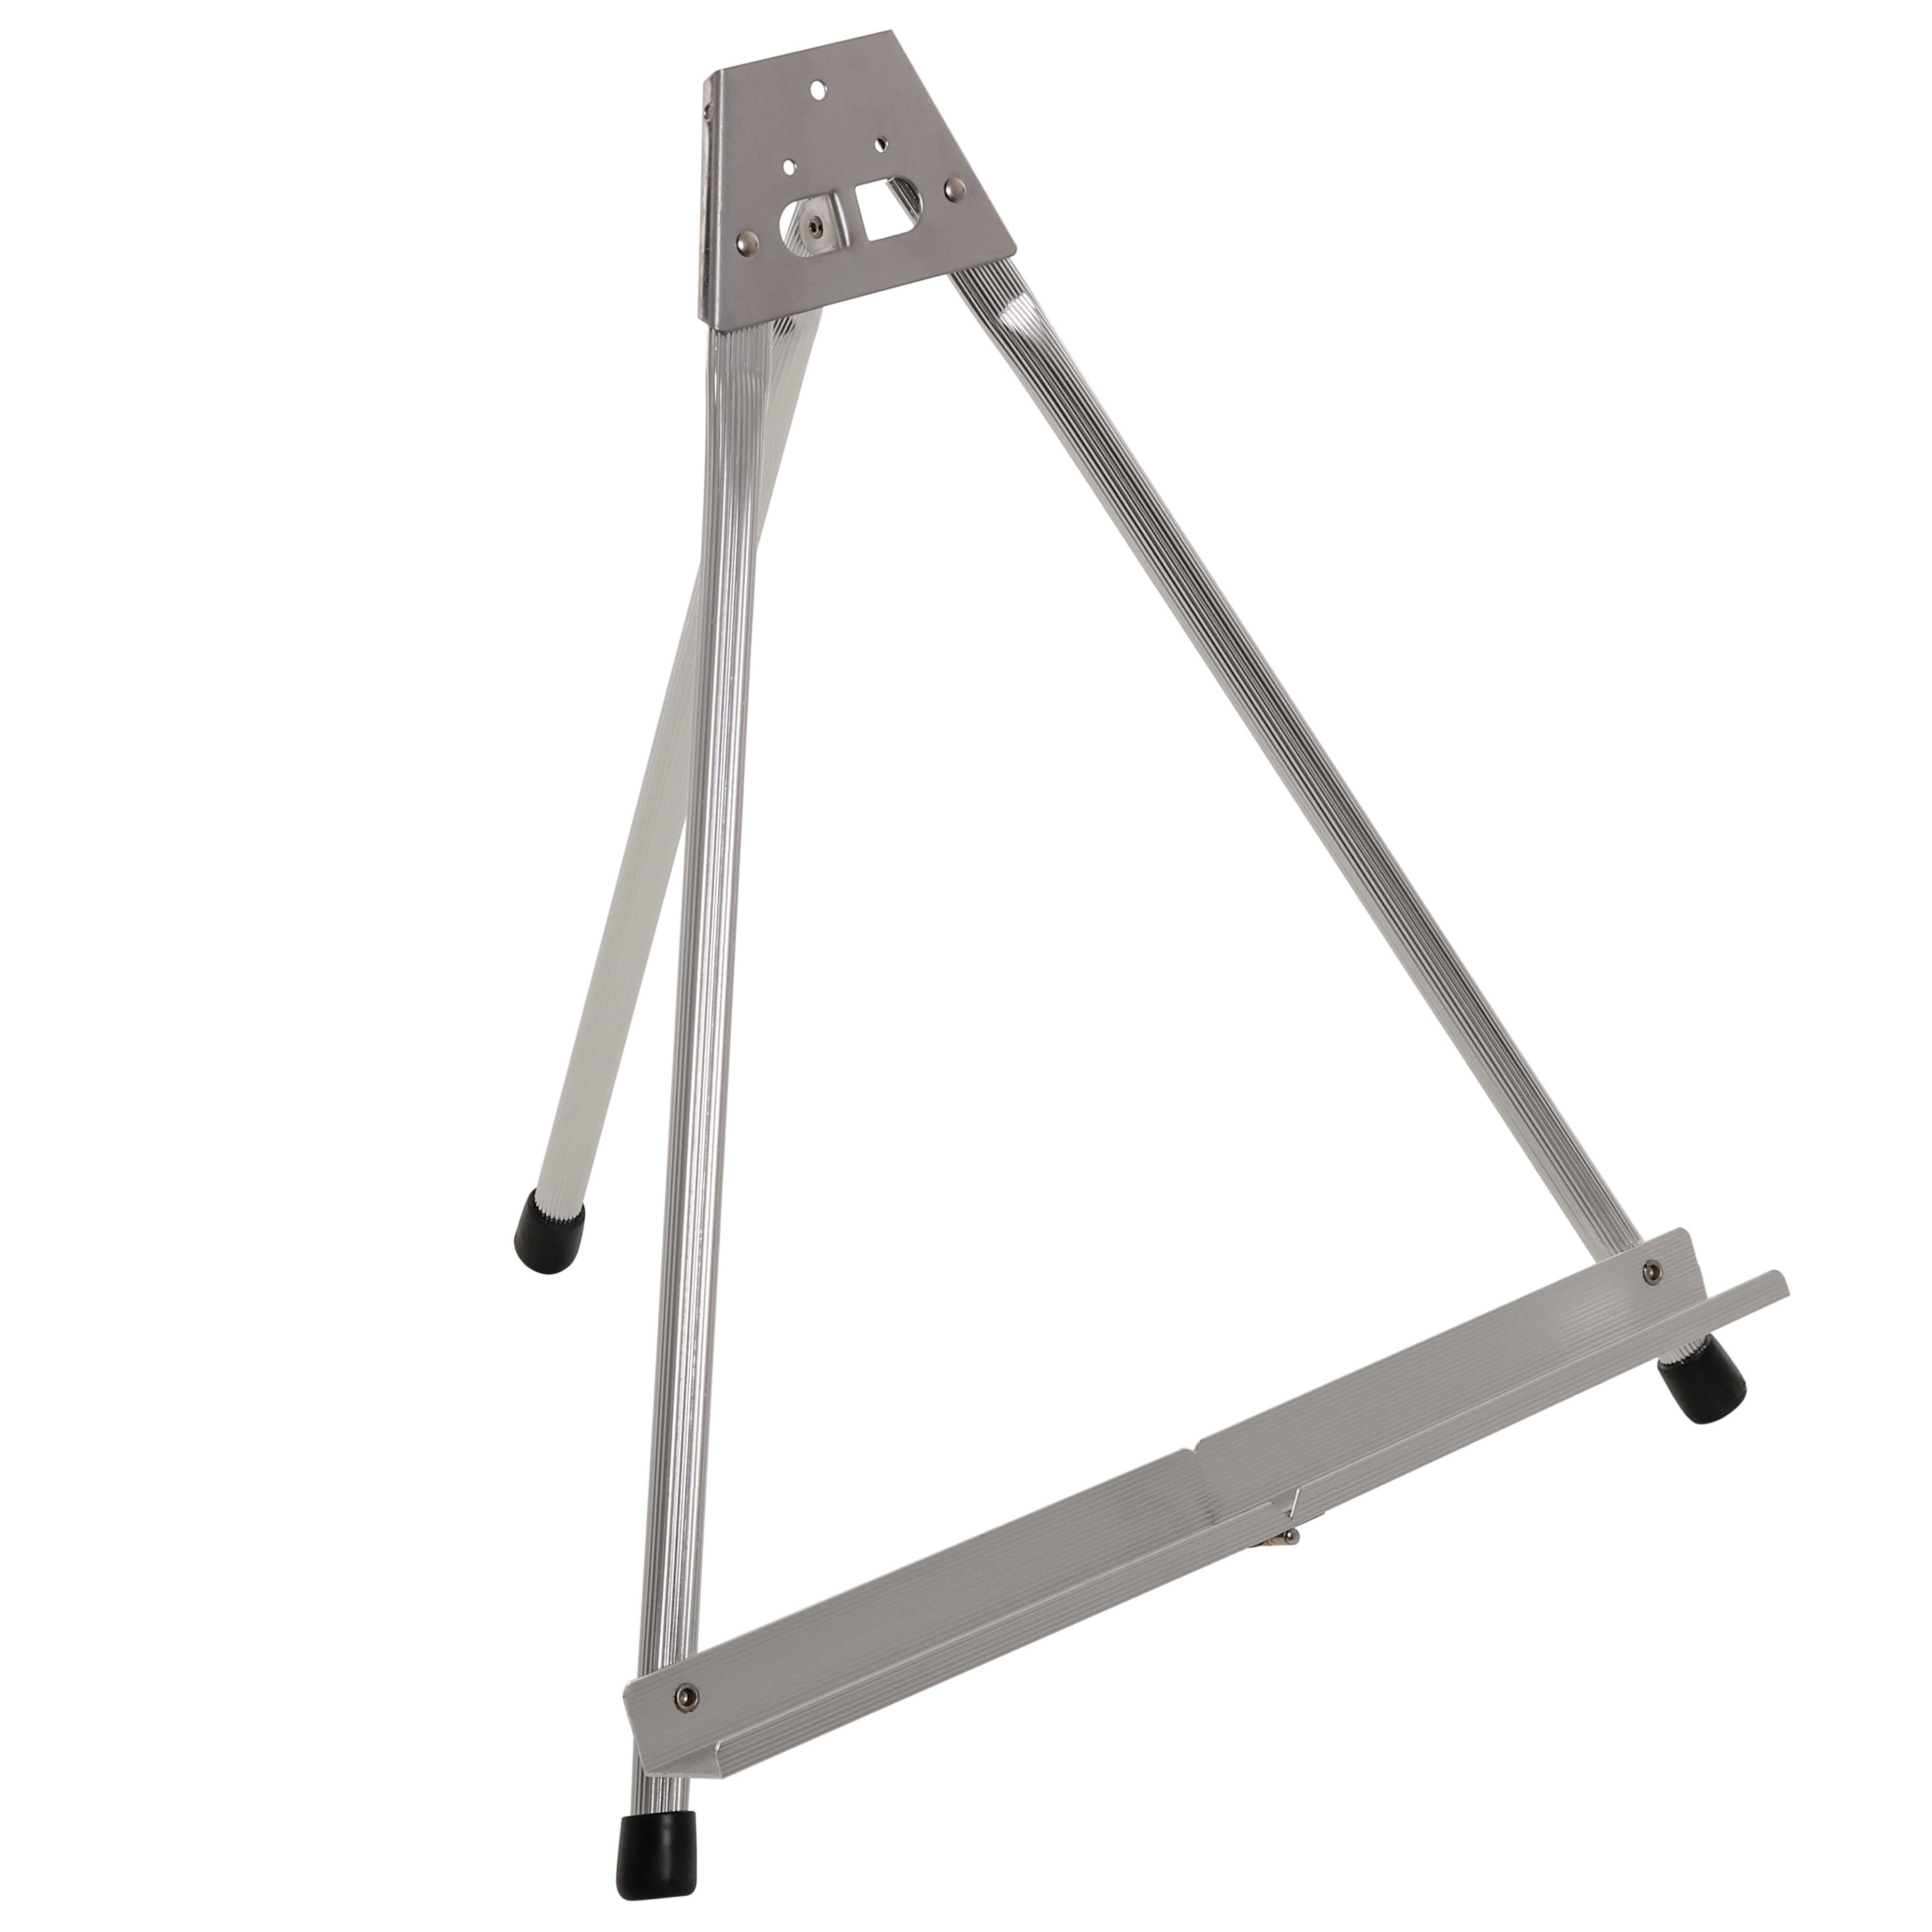 Aluminum　Portable　Art　Paintings,　Display　Tripod　High　Artist　Stand　Supply　Canvas,　Easel,　15